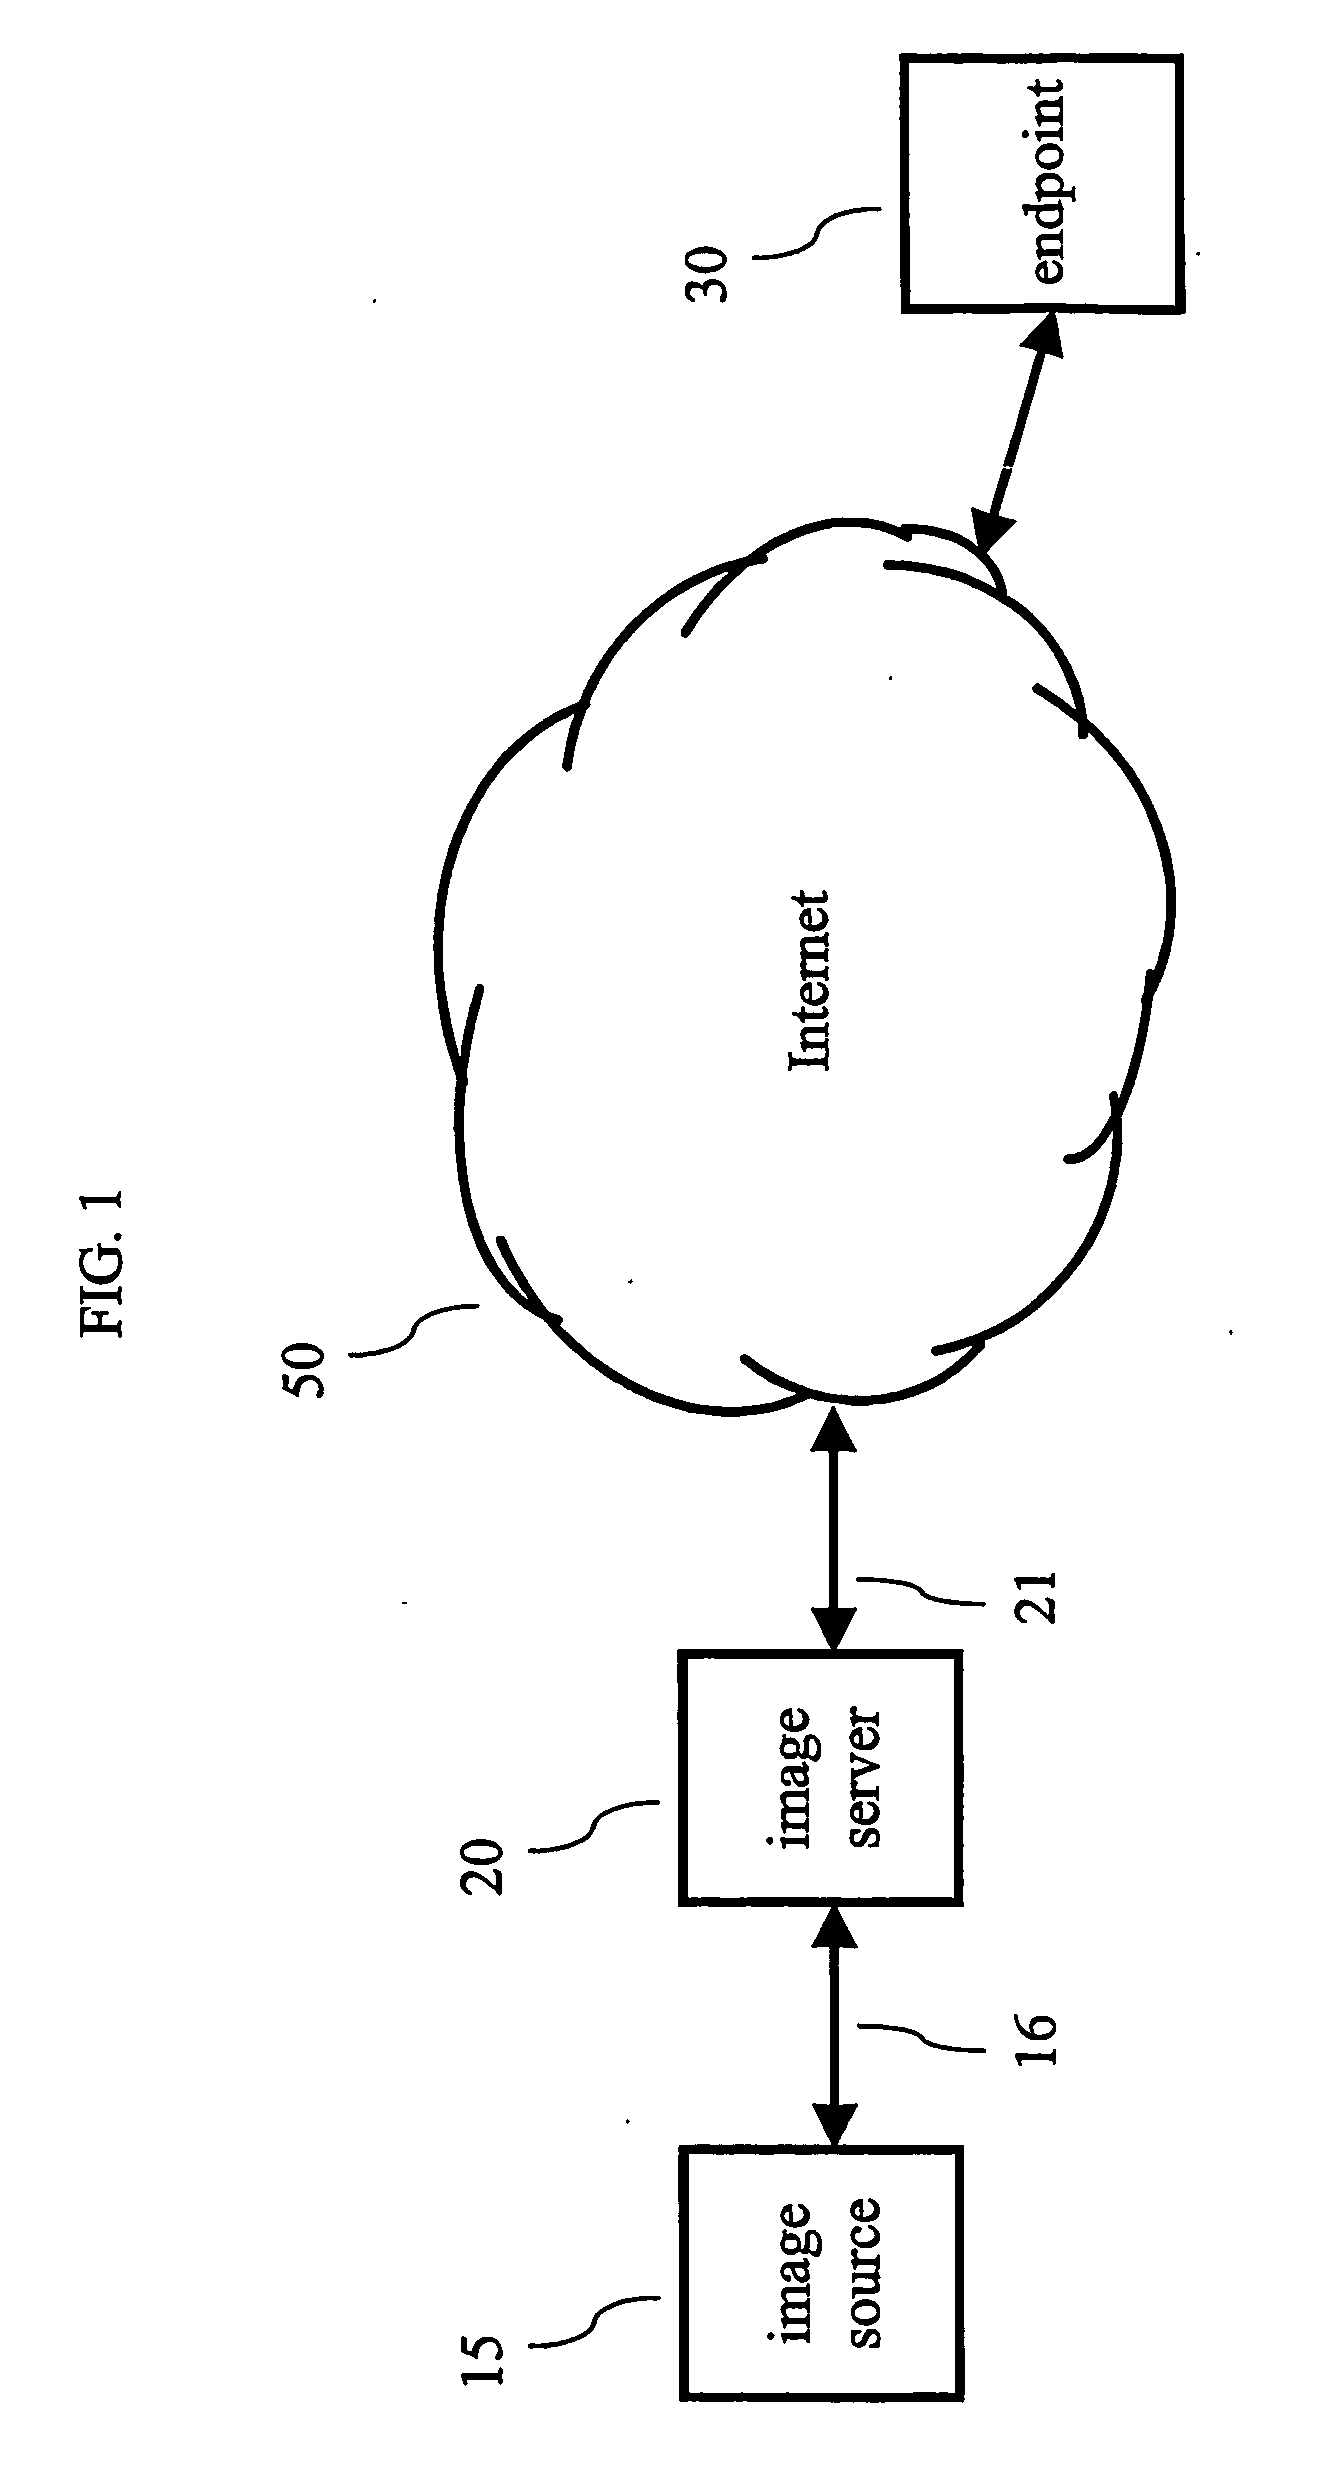 Apparatus and method for reducing noise in an image